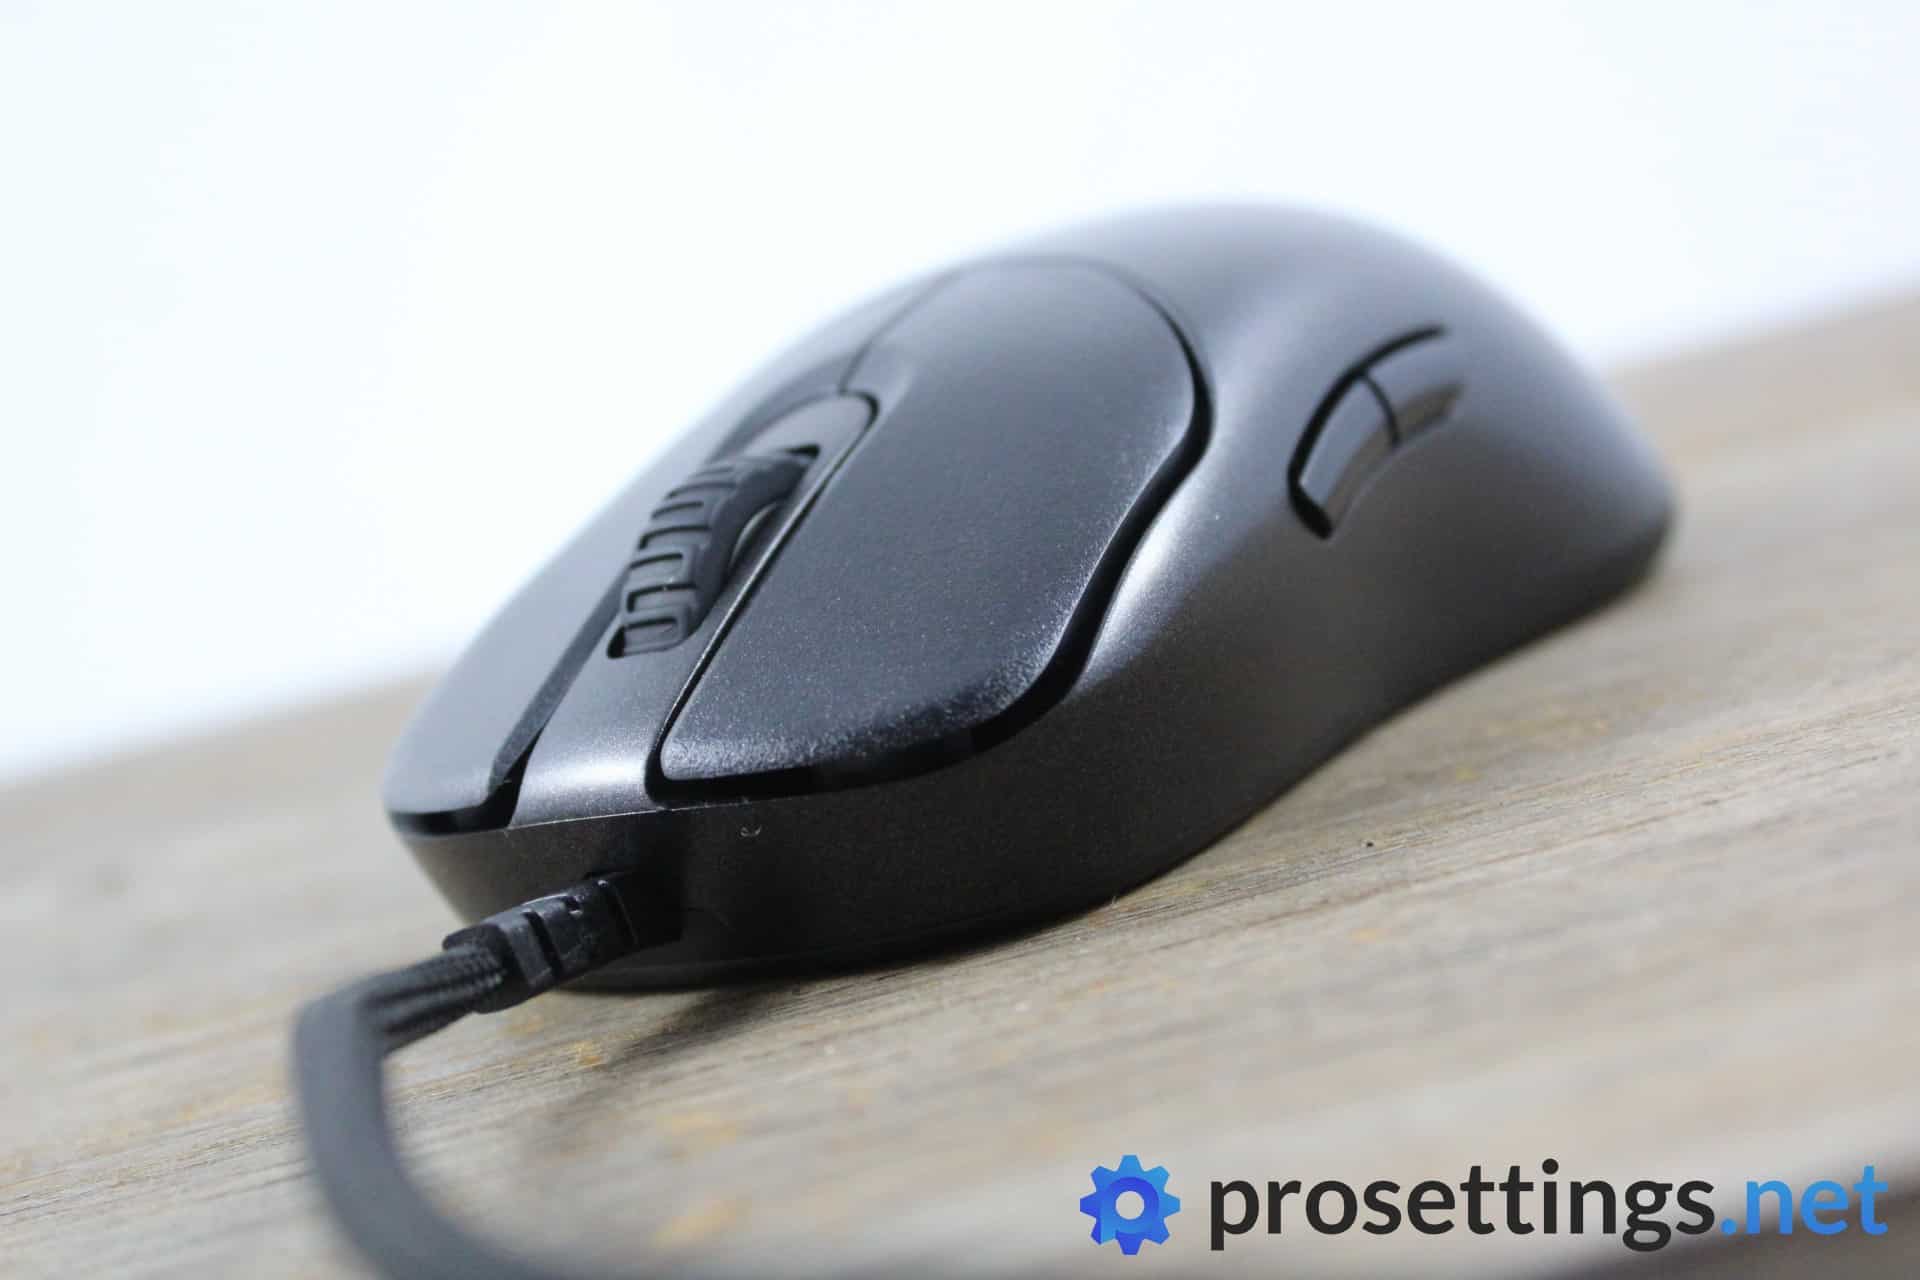 Vaxee Zygen NP-01 Mouse Review